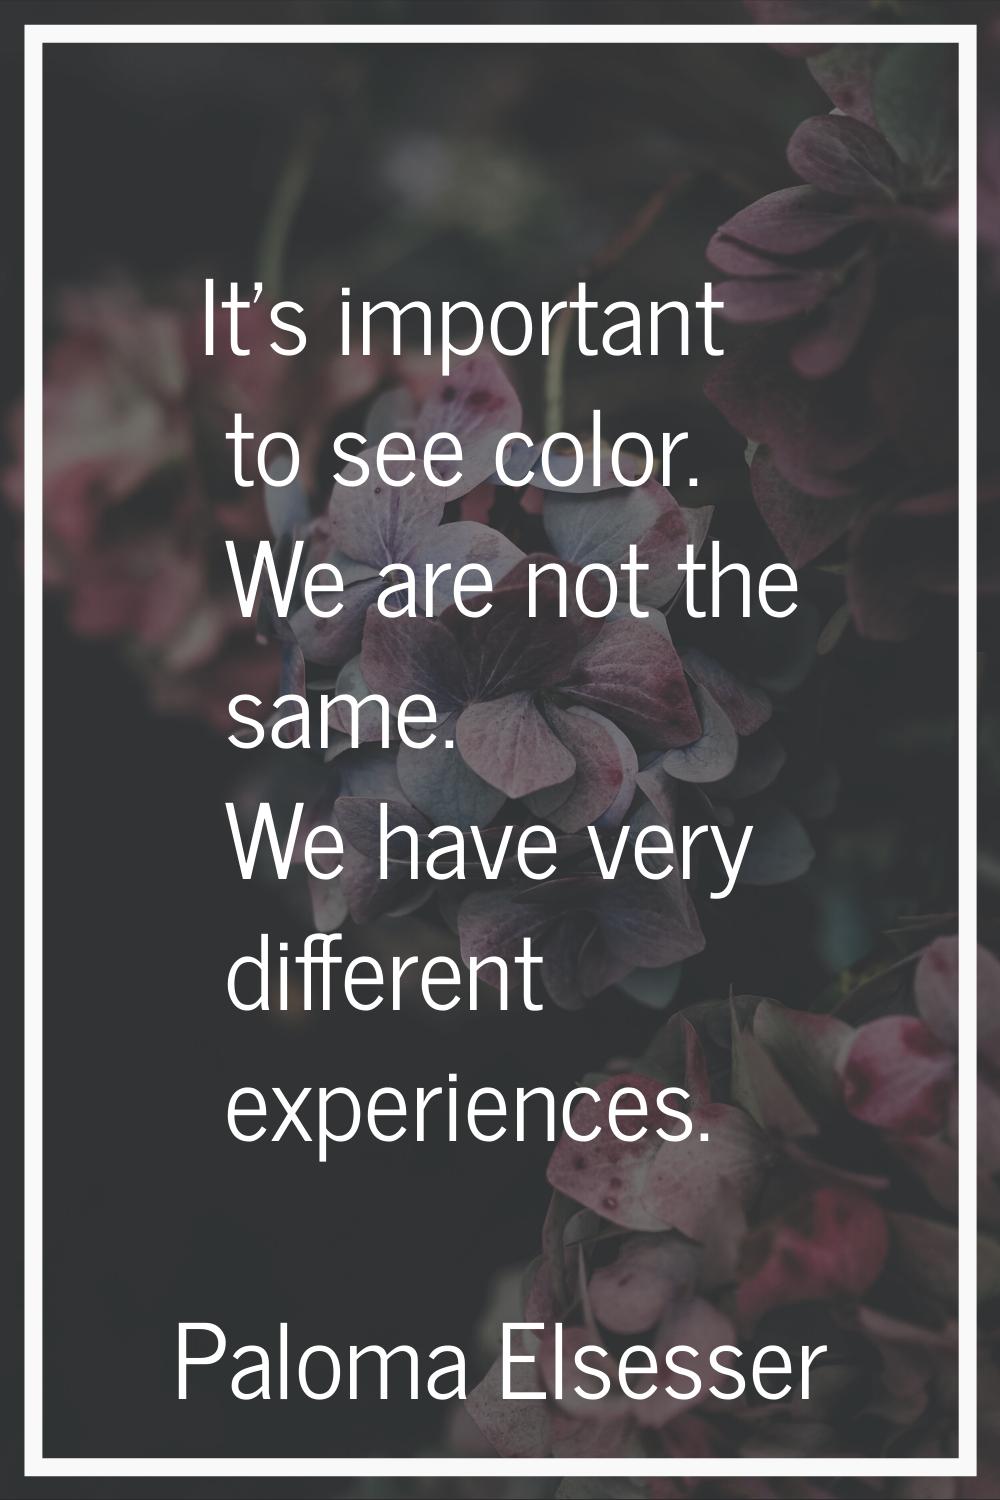 It's important to see color. We are not the same. We have very different experiences.